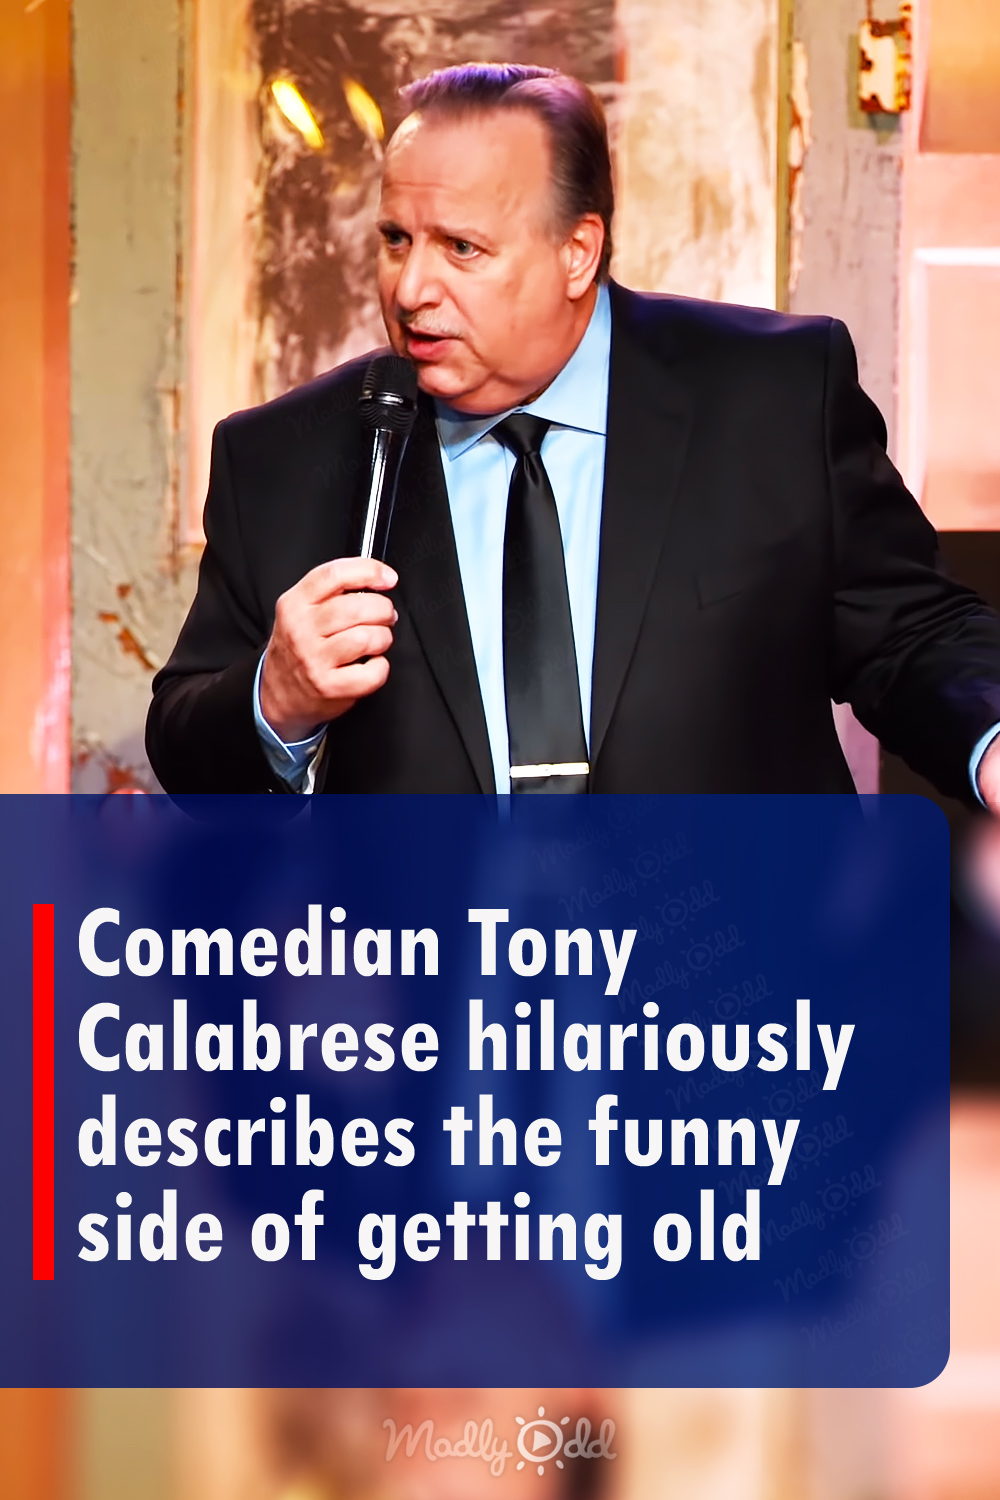 Comedian Tony Calabrese hilariously describes the funny side of getting old